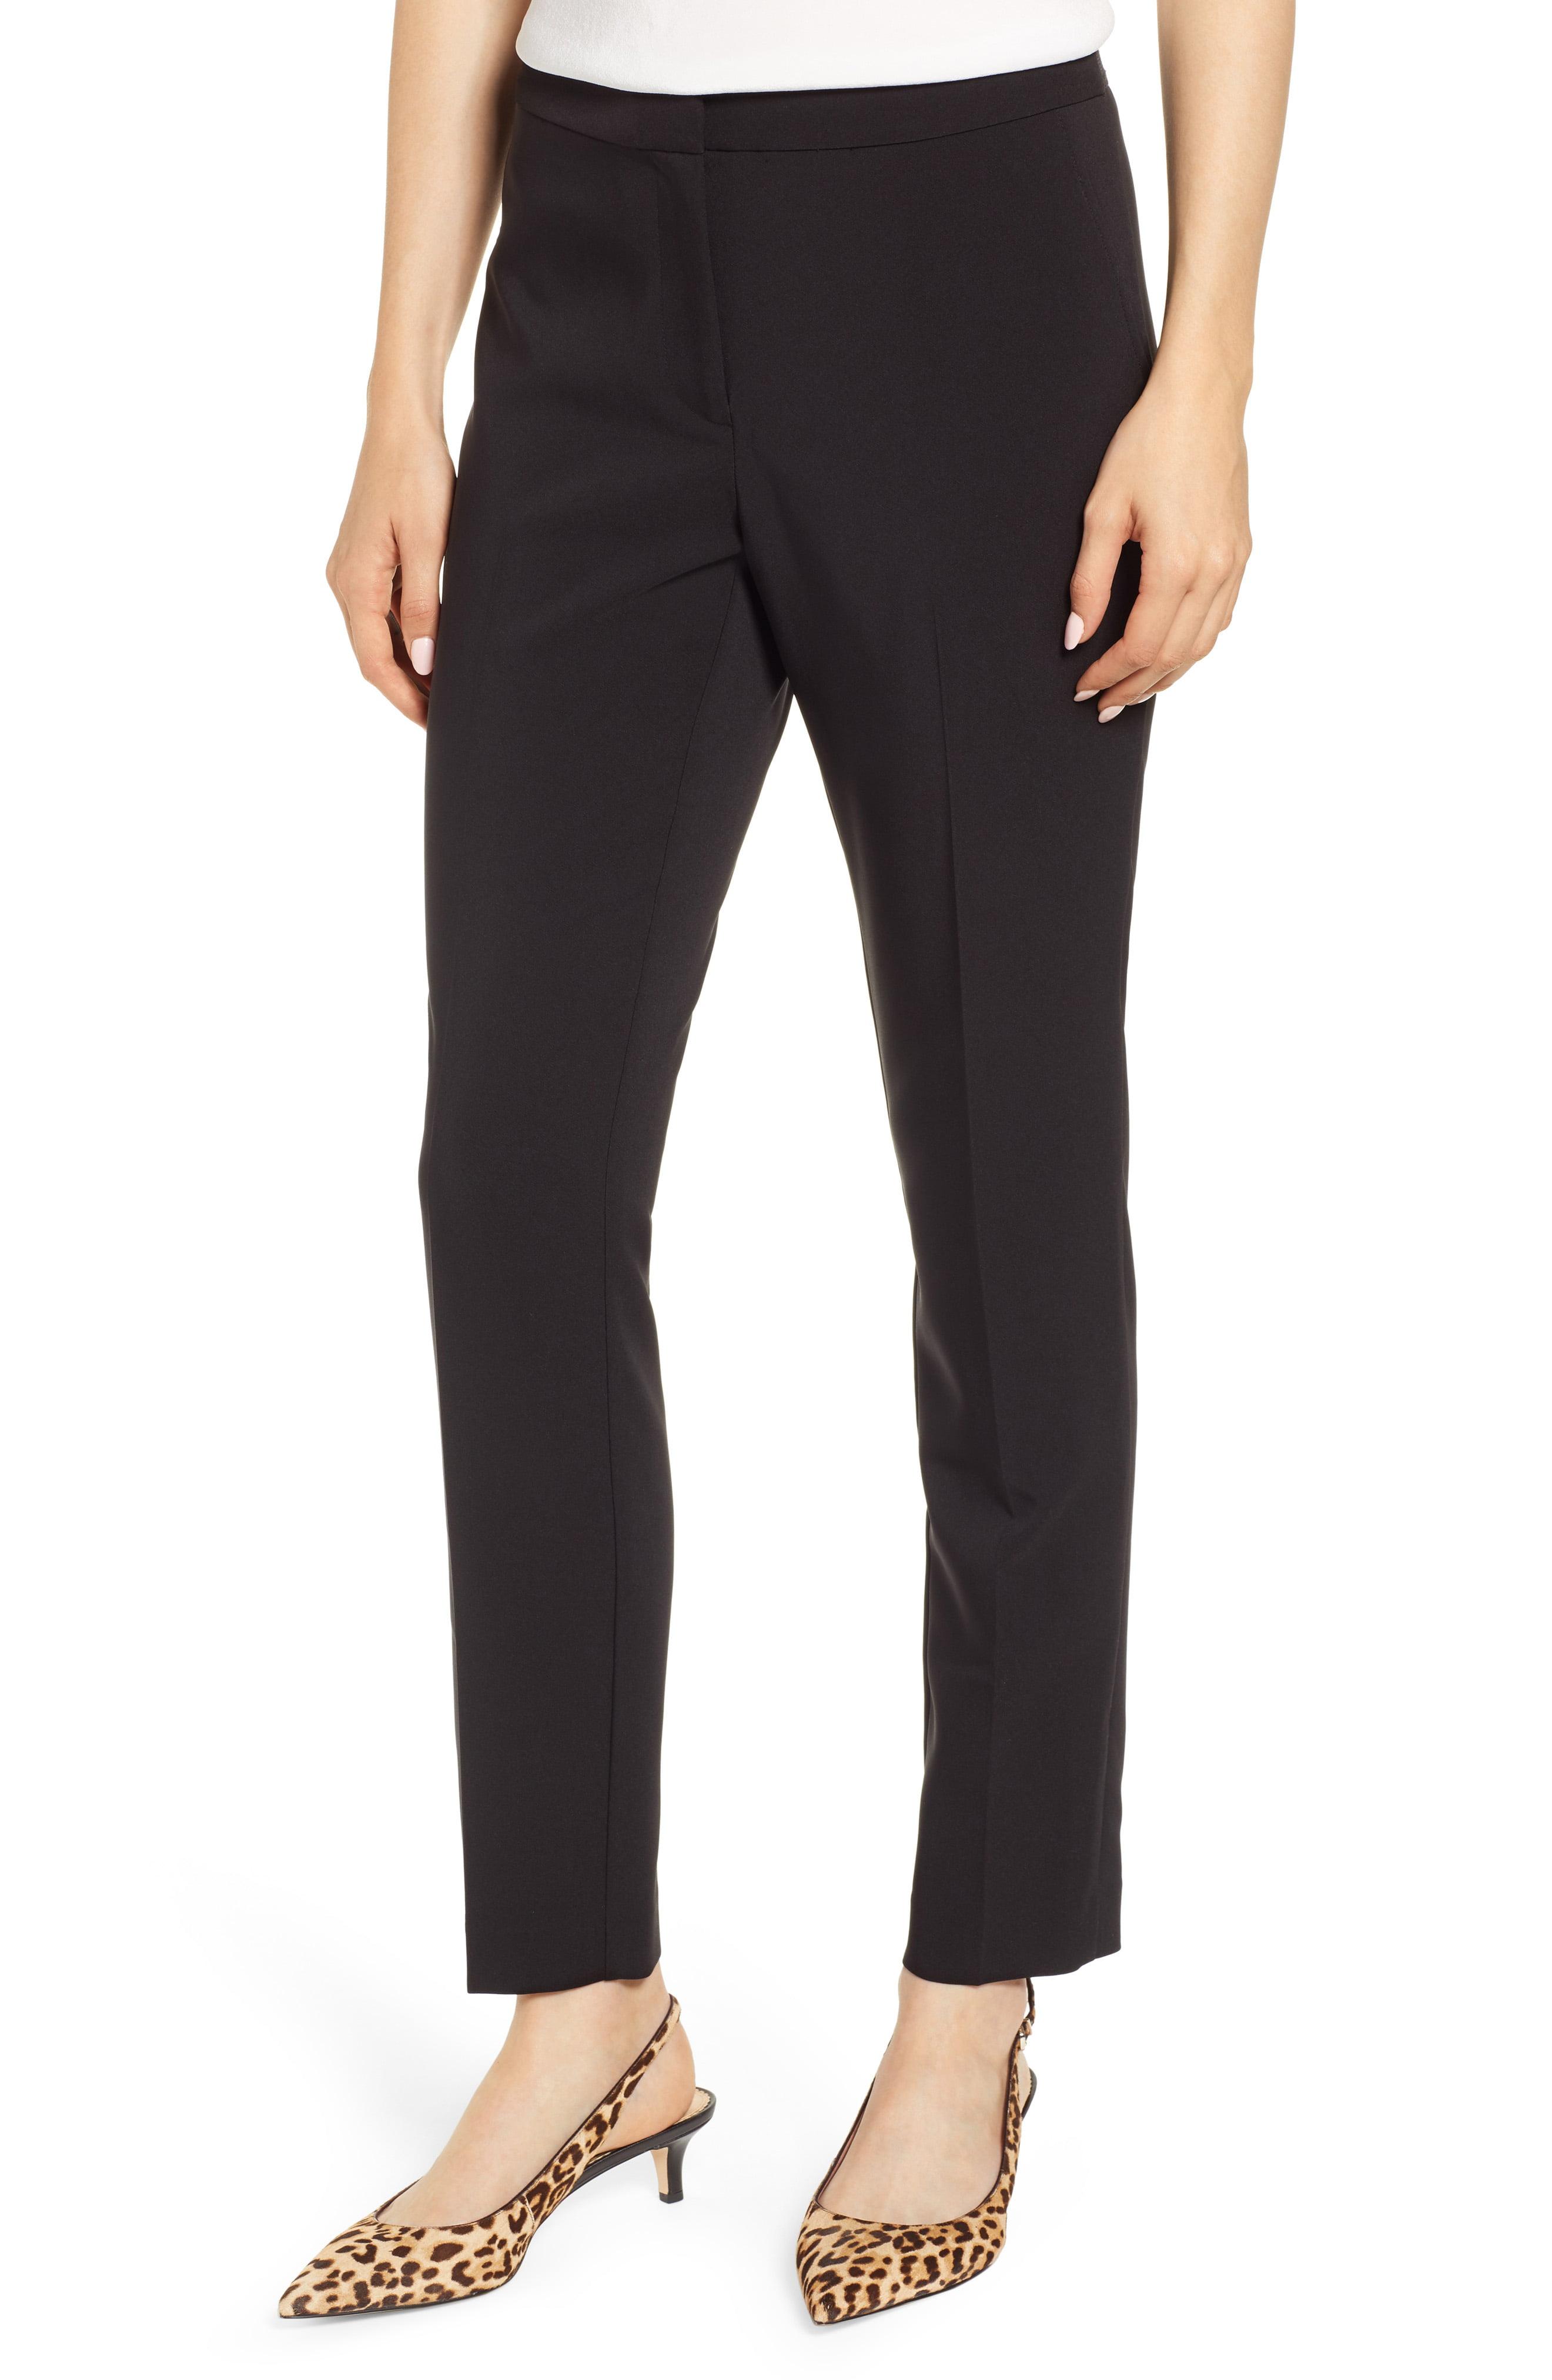 Lyst - Vince Camuto Milano Twill Skinny Ankle Pants in Black